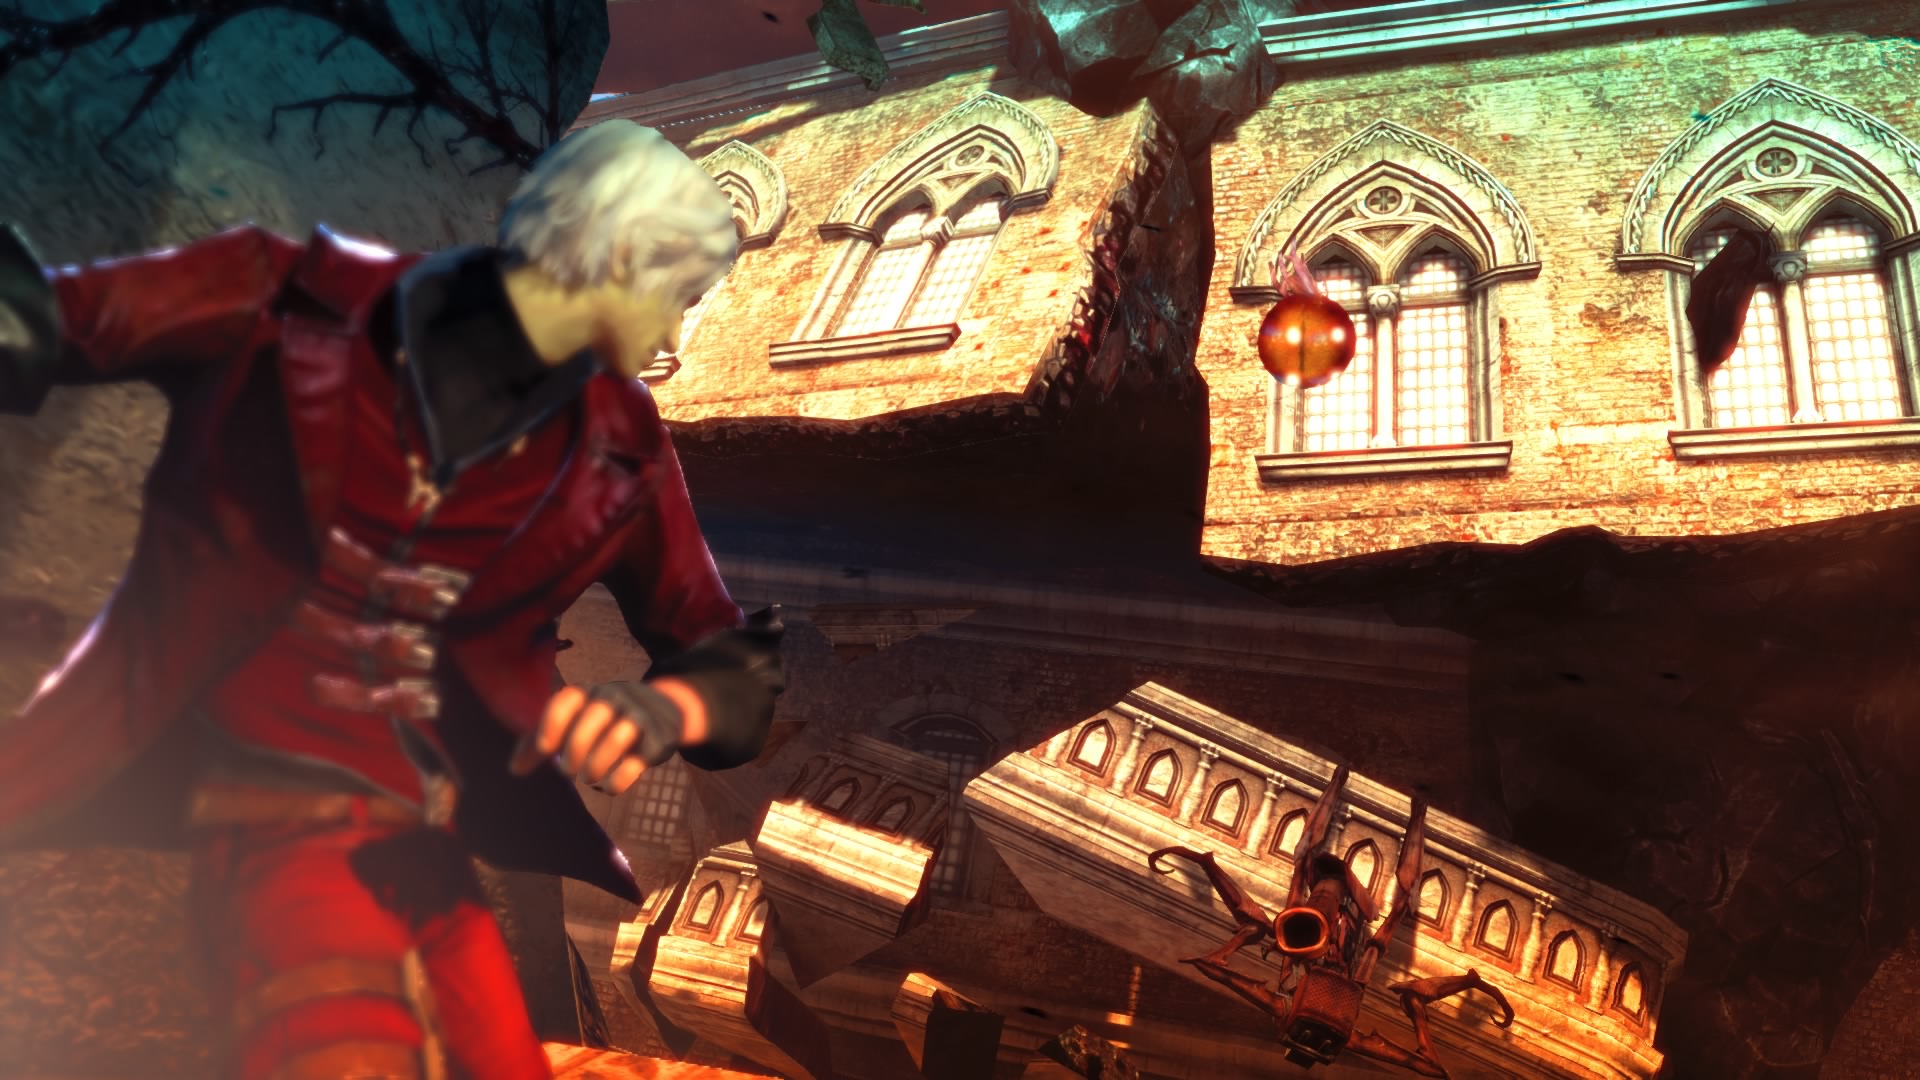 DmC: Devil May Cry Definitive Edition Review Gallery